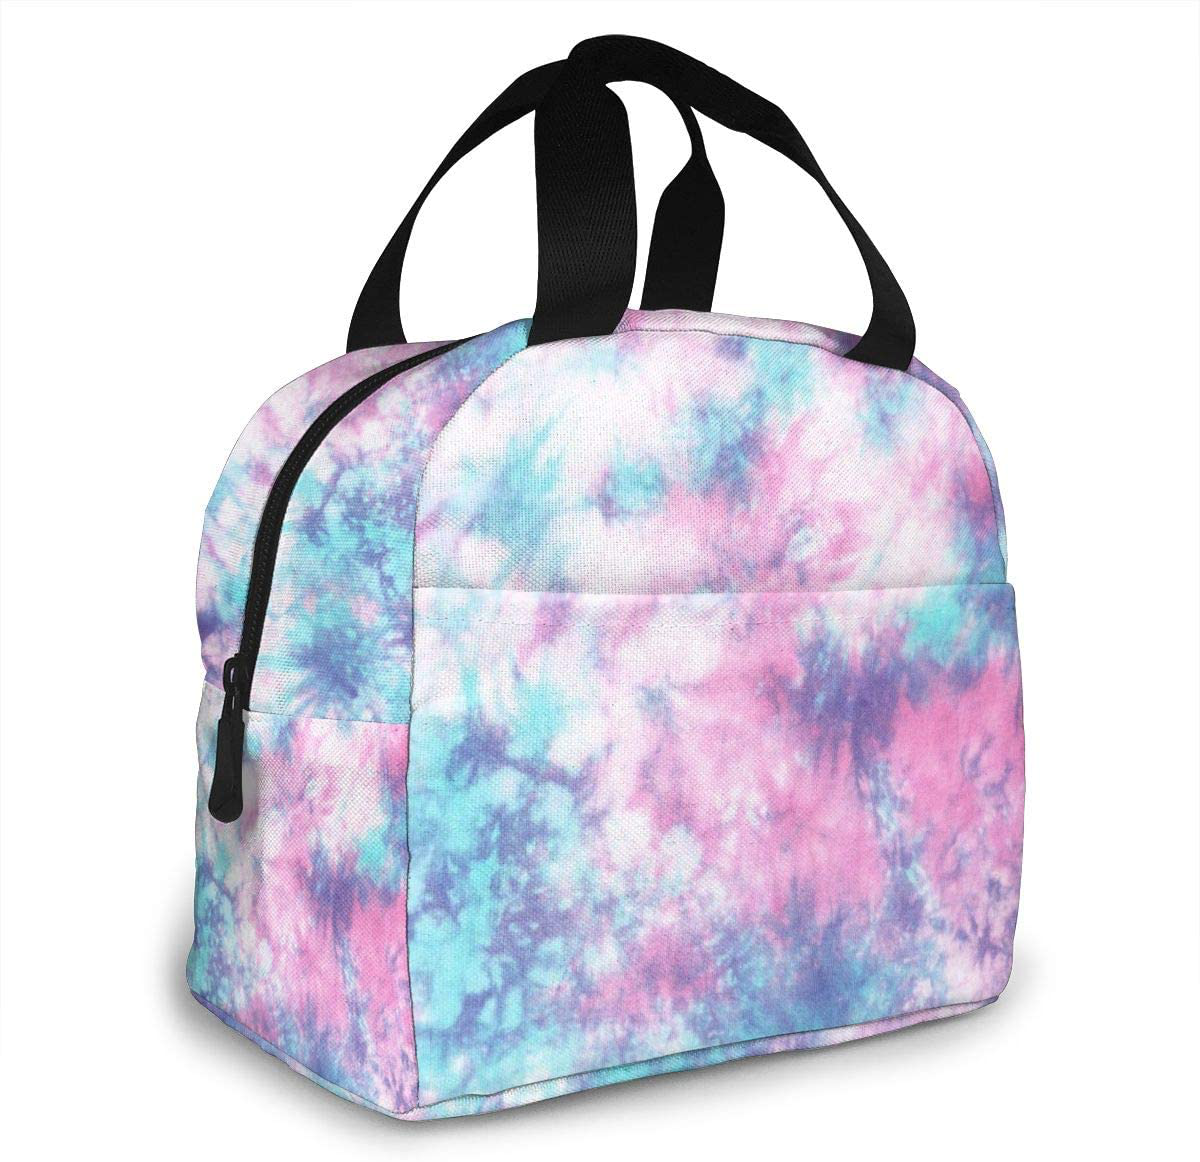 PrelerDIY Abstract Liquid Lunch Box - Insulated Lunch Bags for Women/Men Watercolor Design Reusable Lunch Tote Bags, Perfect for Office/Camping/Hiking/Picnic/Beach/Travel